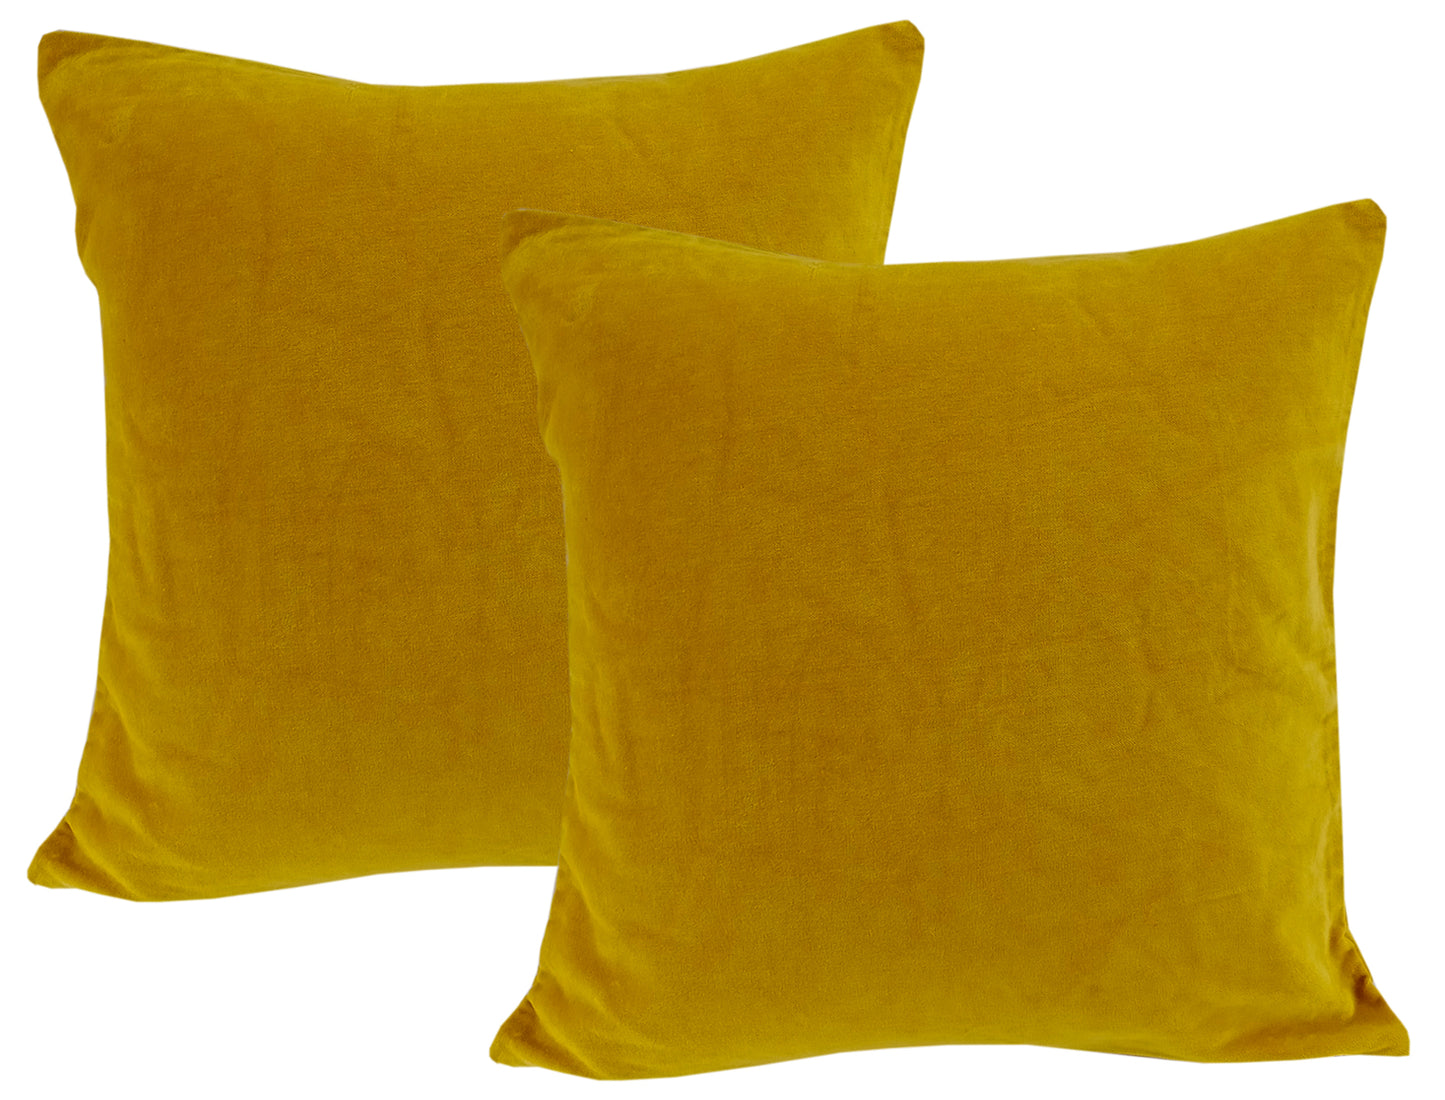 Solid Mustard Yellow Velvet Cushion Cover - The Teal Thread